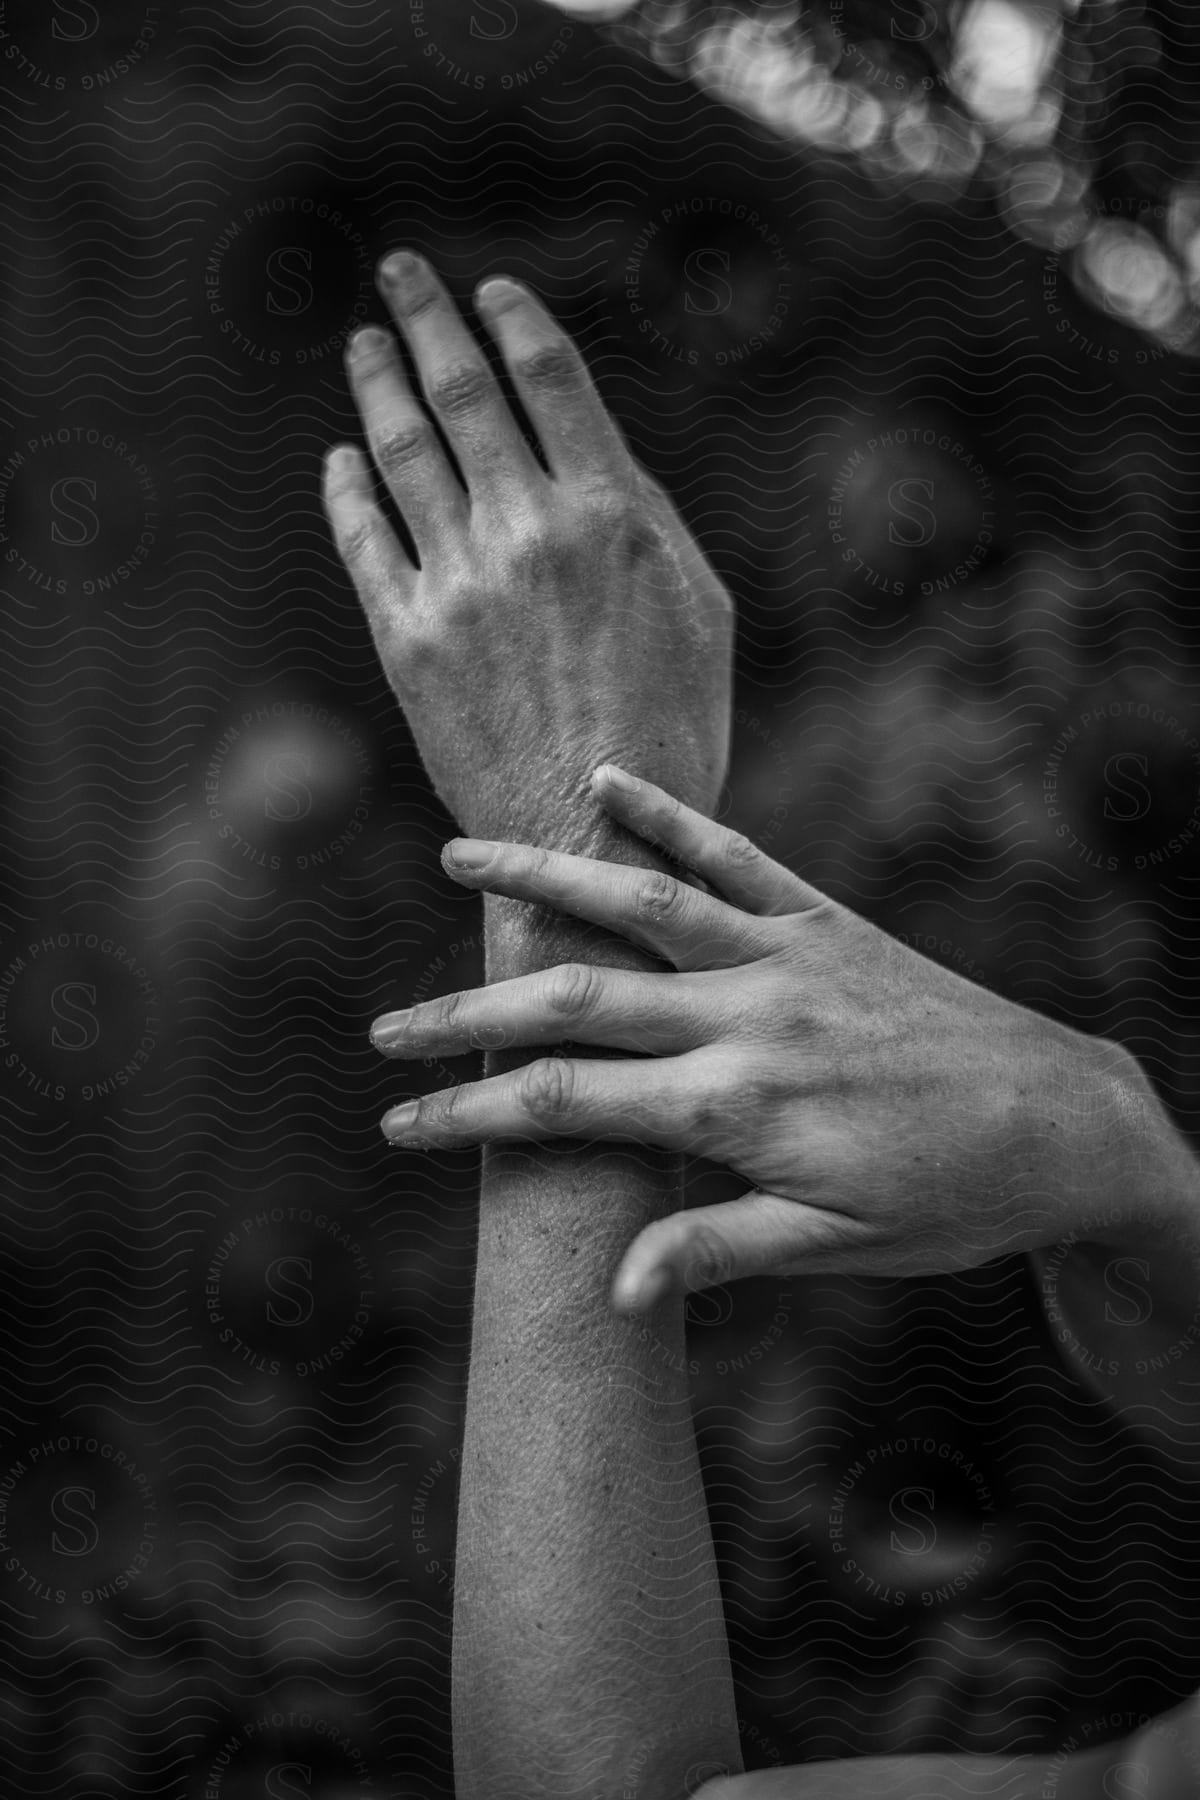 Two arms of a person with a hand touching an arm and everything is black and white.